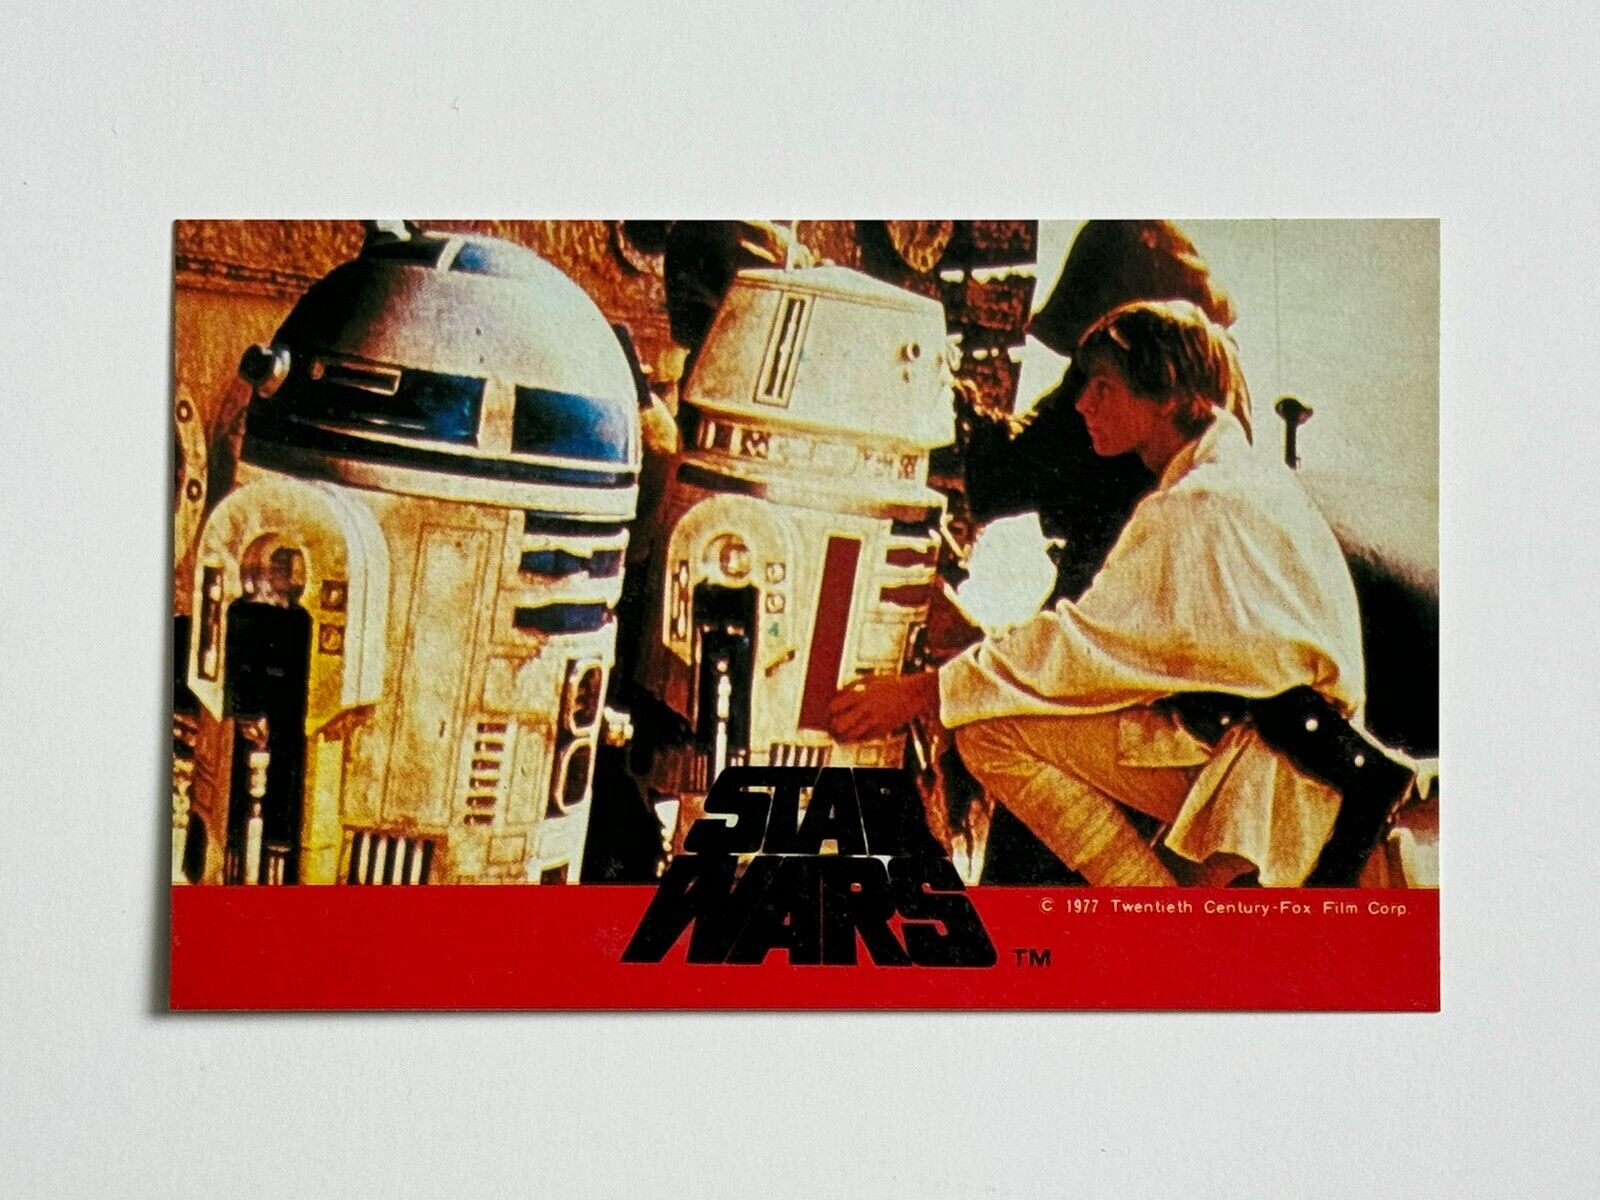 Star Wars Tokyo Queen Red border Luke and Droids [1977] Japan